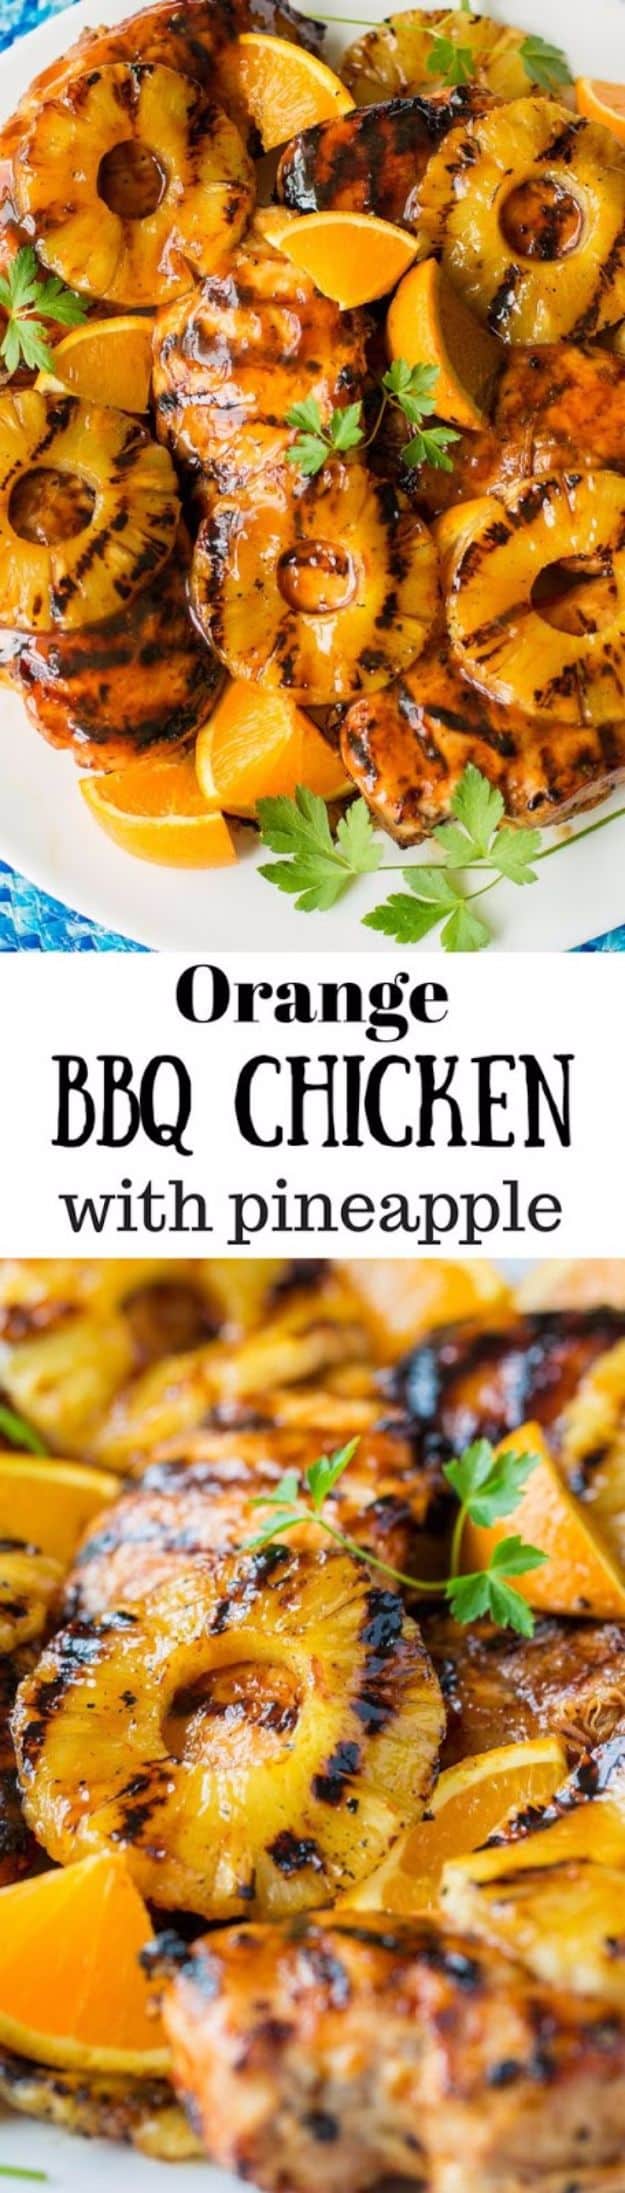 Best Barbecue Recipes - Orange Barbecue Grilled Chicken - Easy BBQ Recipe Ideas for Lunch, Dinner and Quick Party Appetizers - Grilled and Smoked Foods, Chicken, Beef and Meat, Fish and Vegetable Ideas for Grilling - Sauces and Rubs, Seasonings and Favorite Bar BBQ Tips #bbq #bbqrecipes #grilling